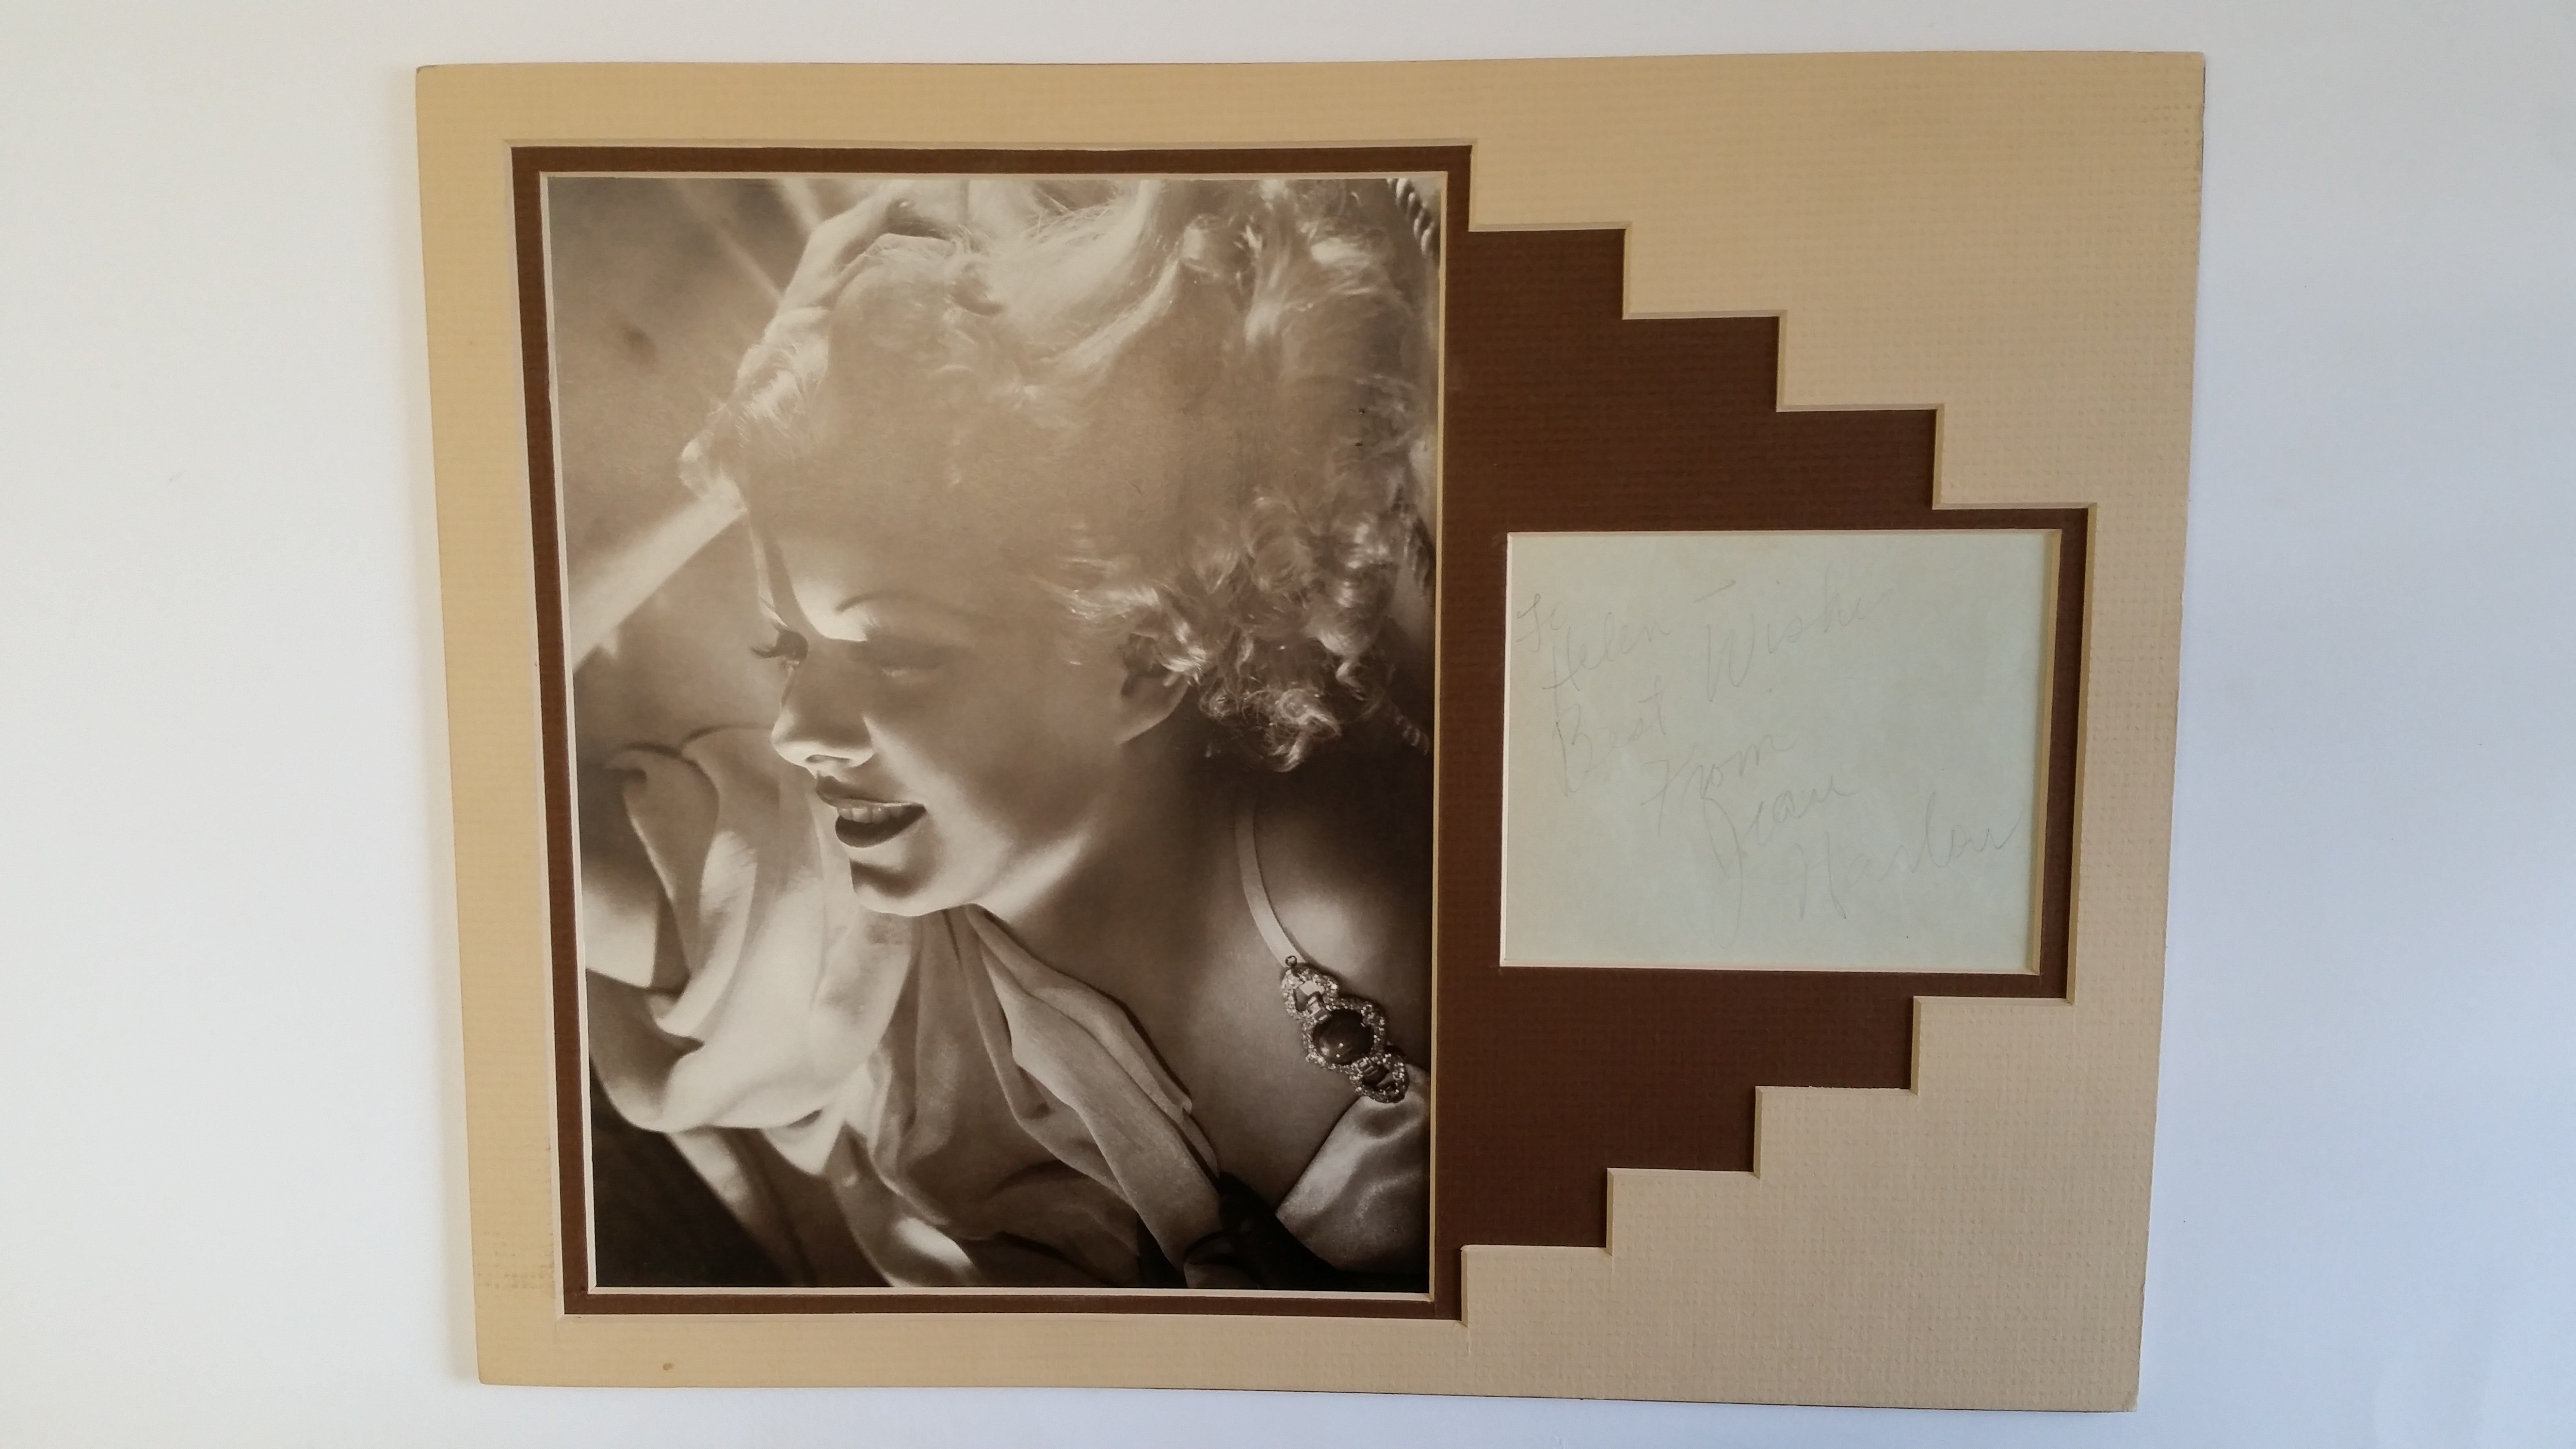 CINEMA, signed album page by Jean Harlow, overmounted beside photo, h/s, 14 x 11 overall, VG